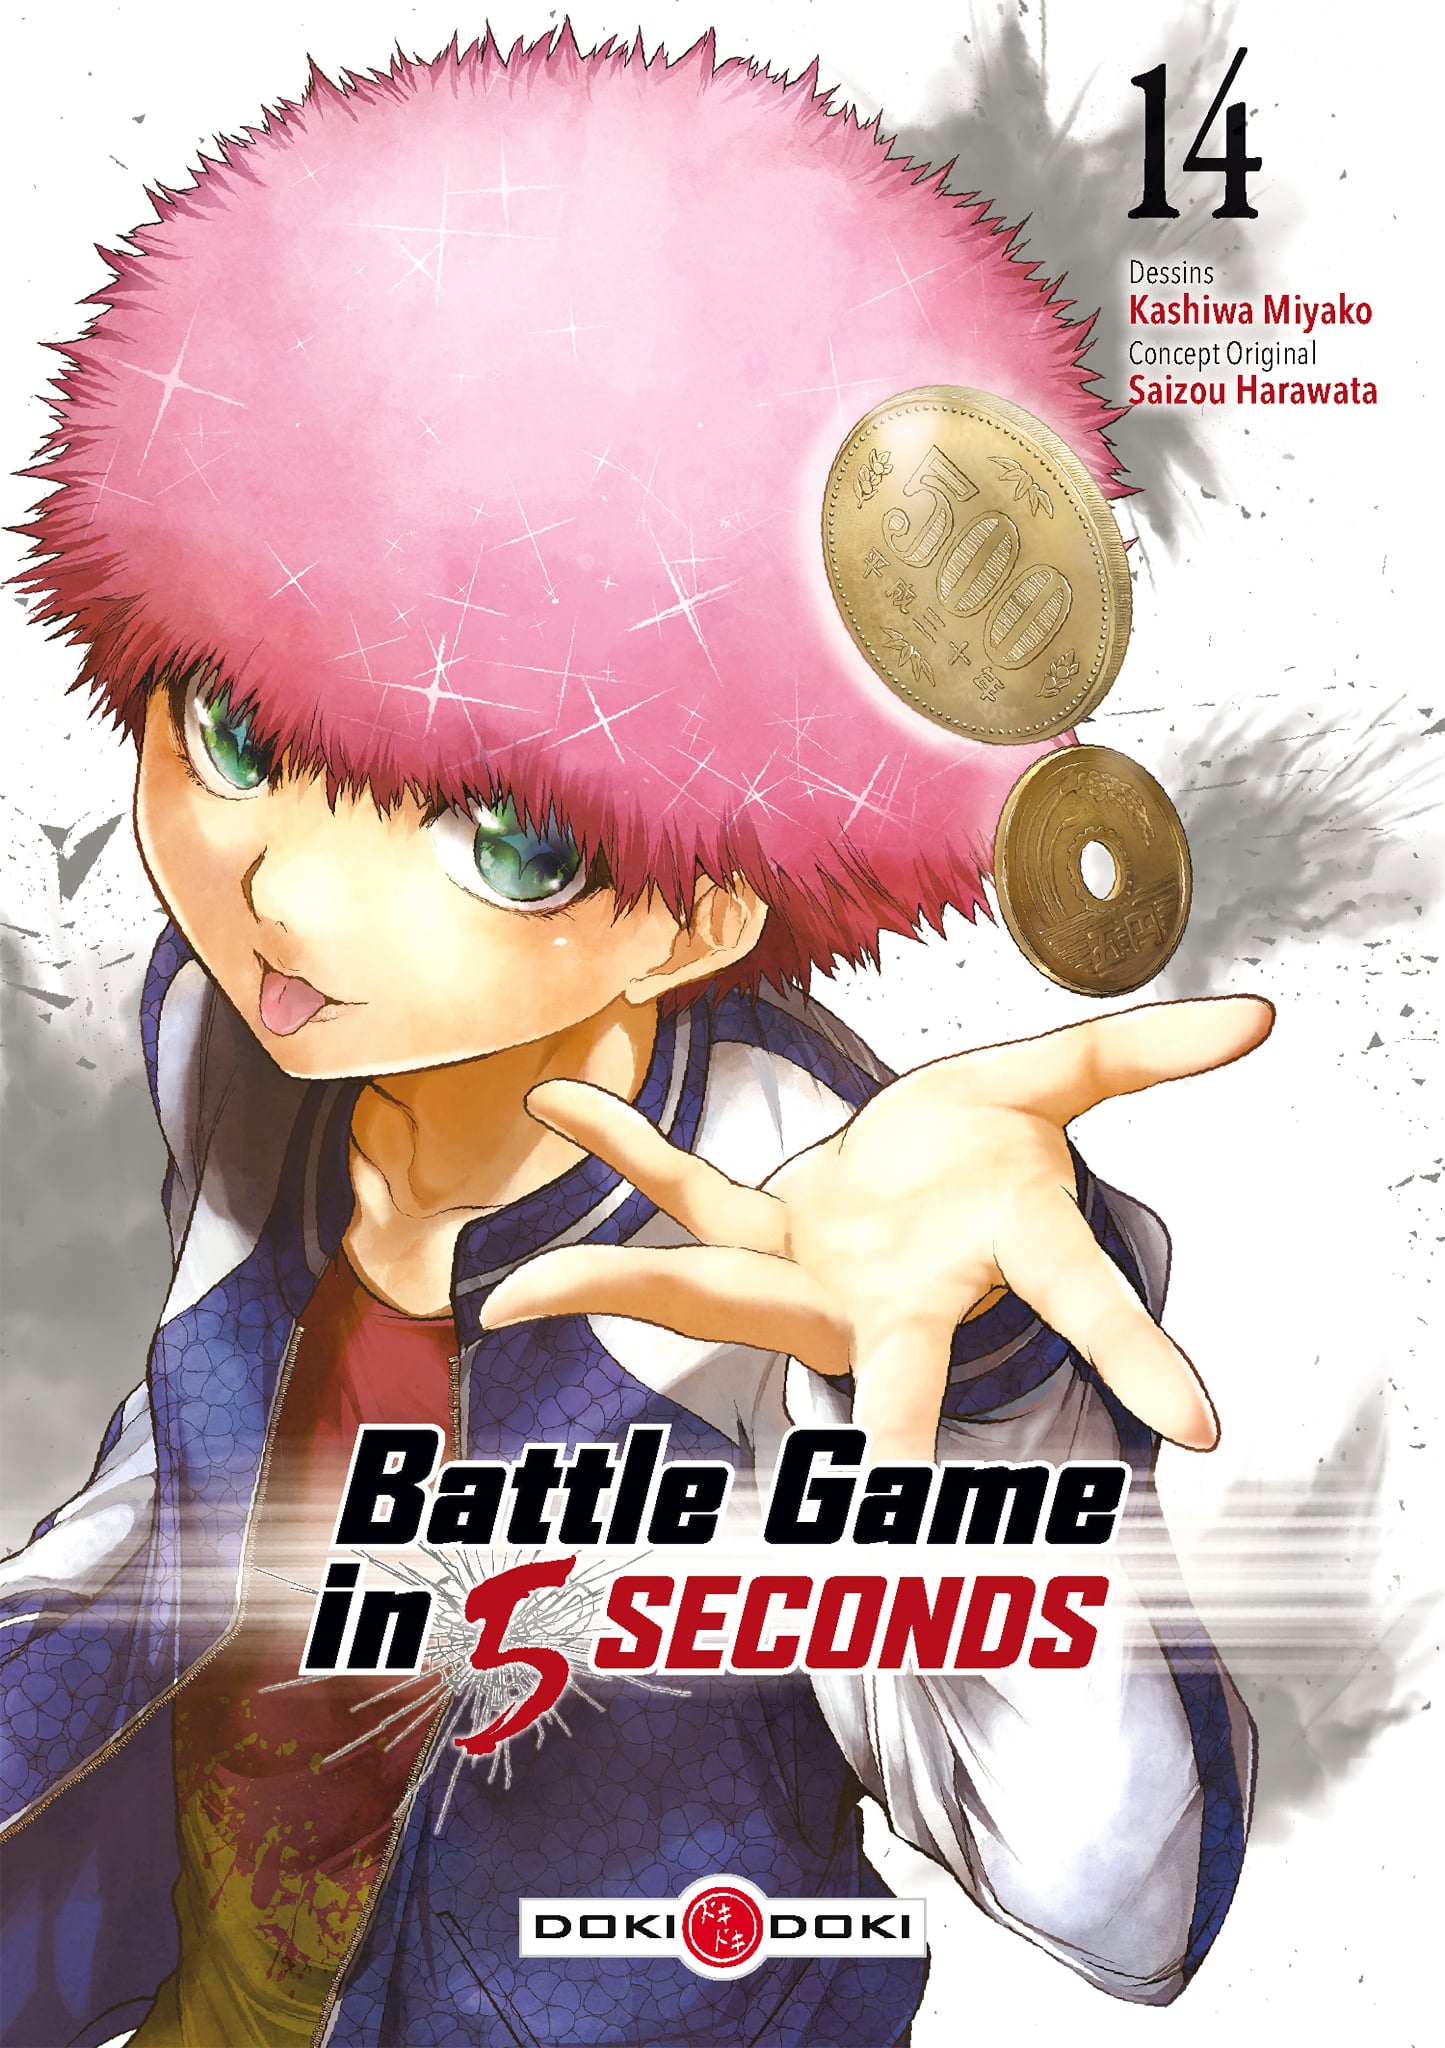 Tome 14 du manga Battle Game in 5 Seconds